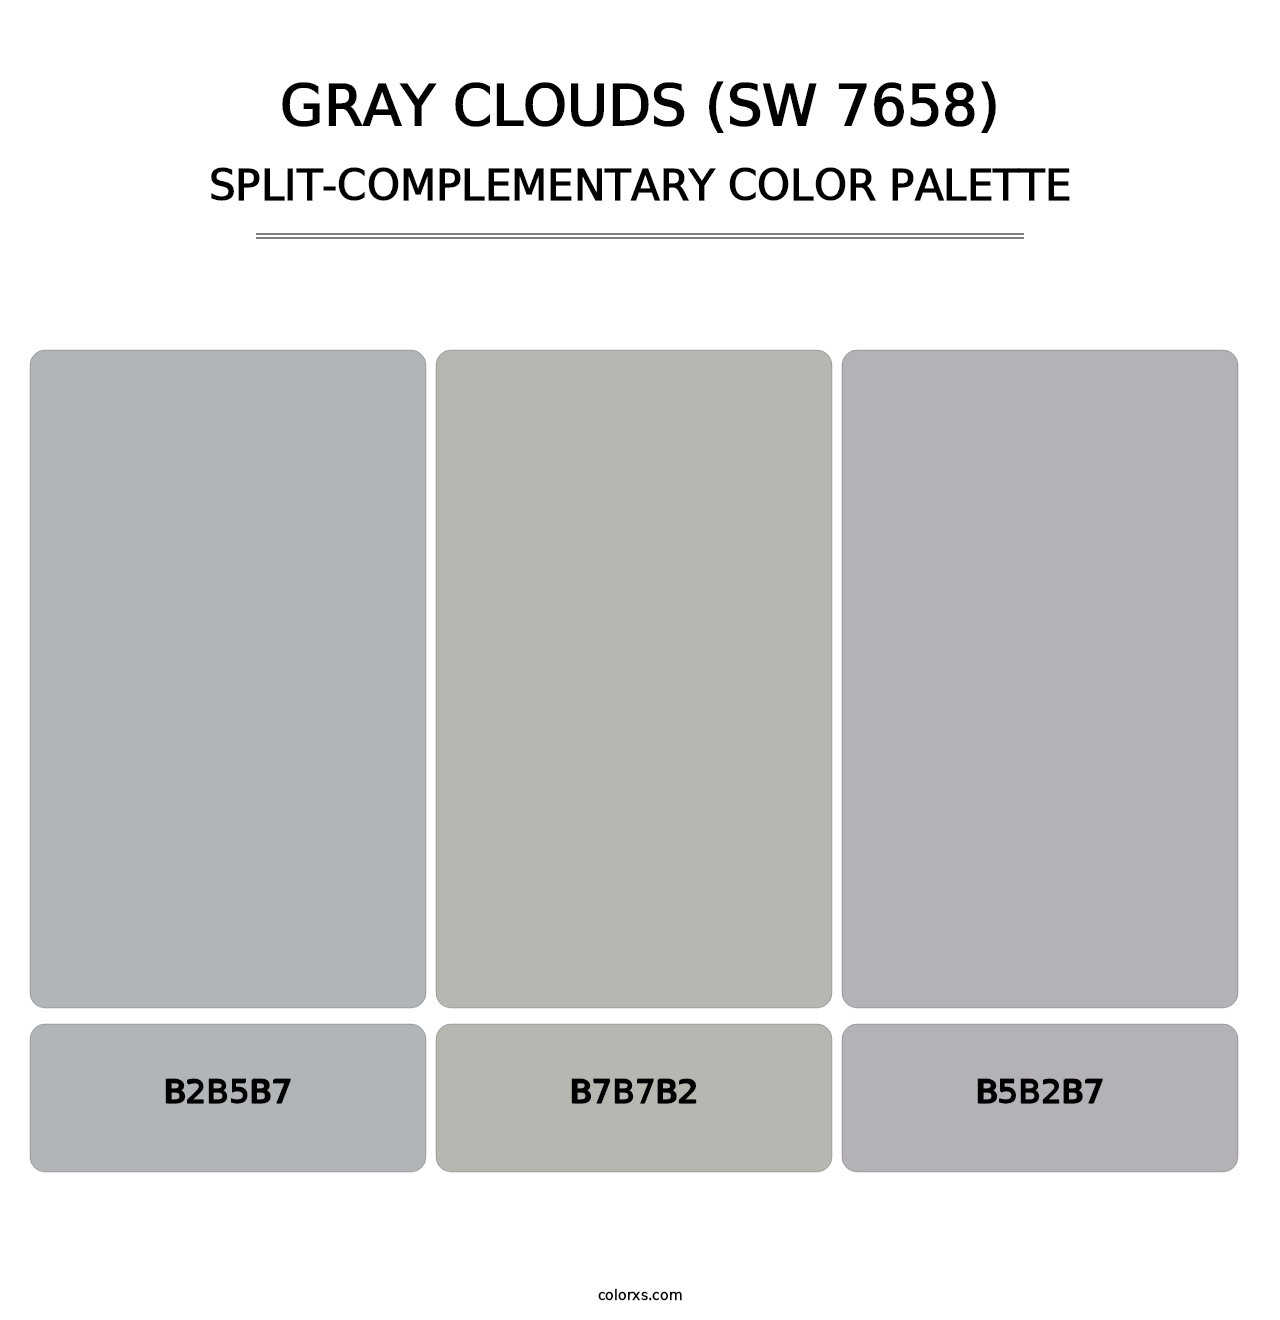 Gray Clouds (SW 7658) - Split-Complementary Color Palette